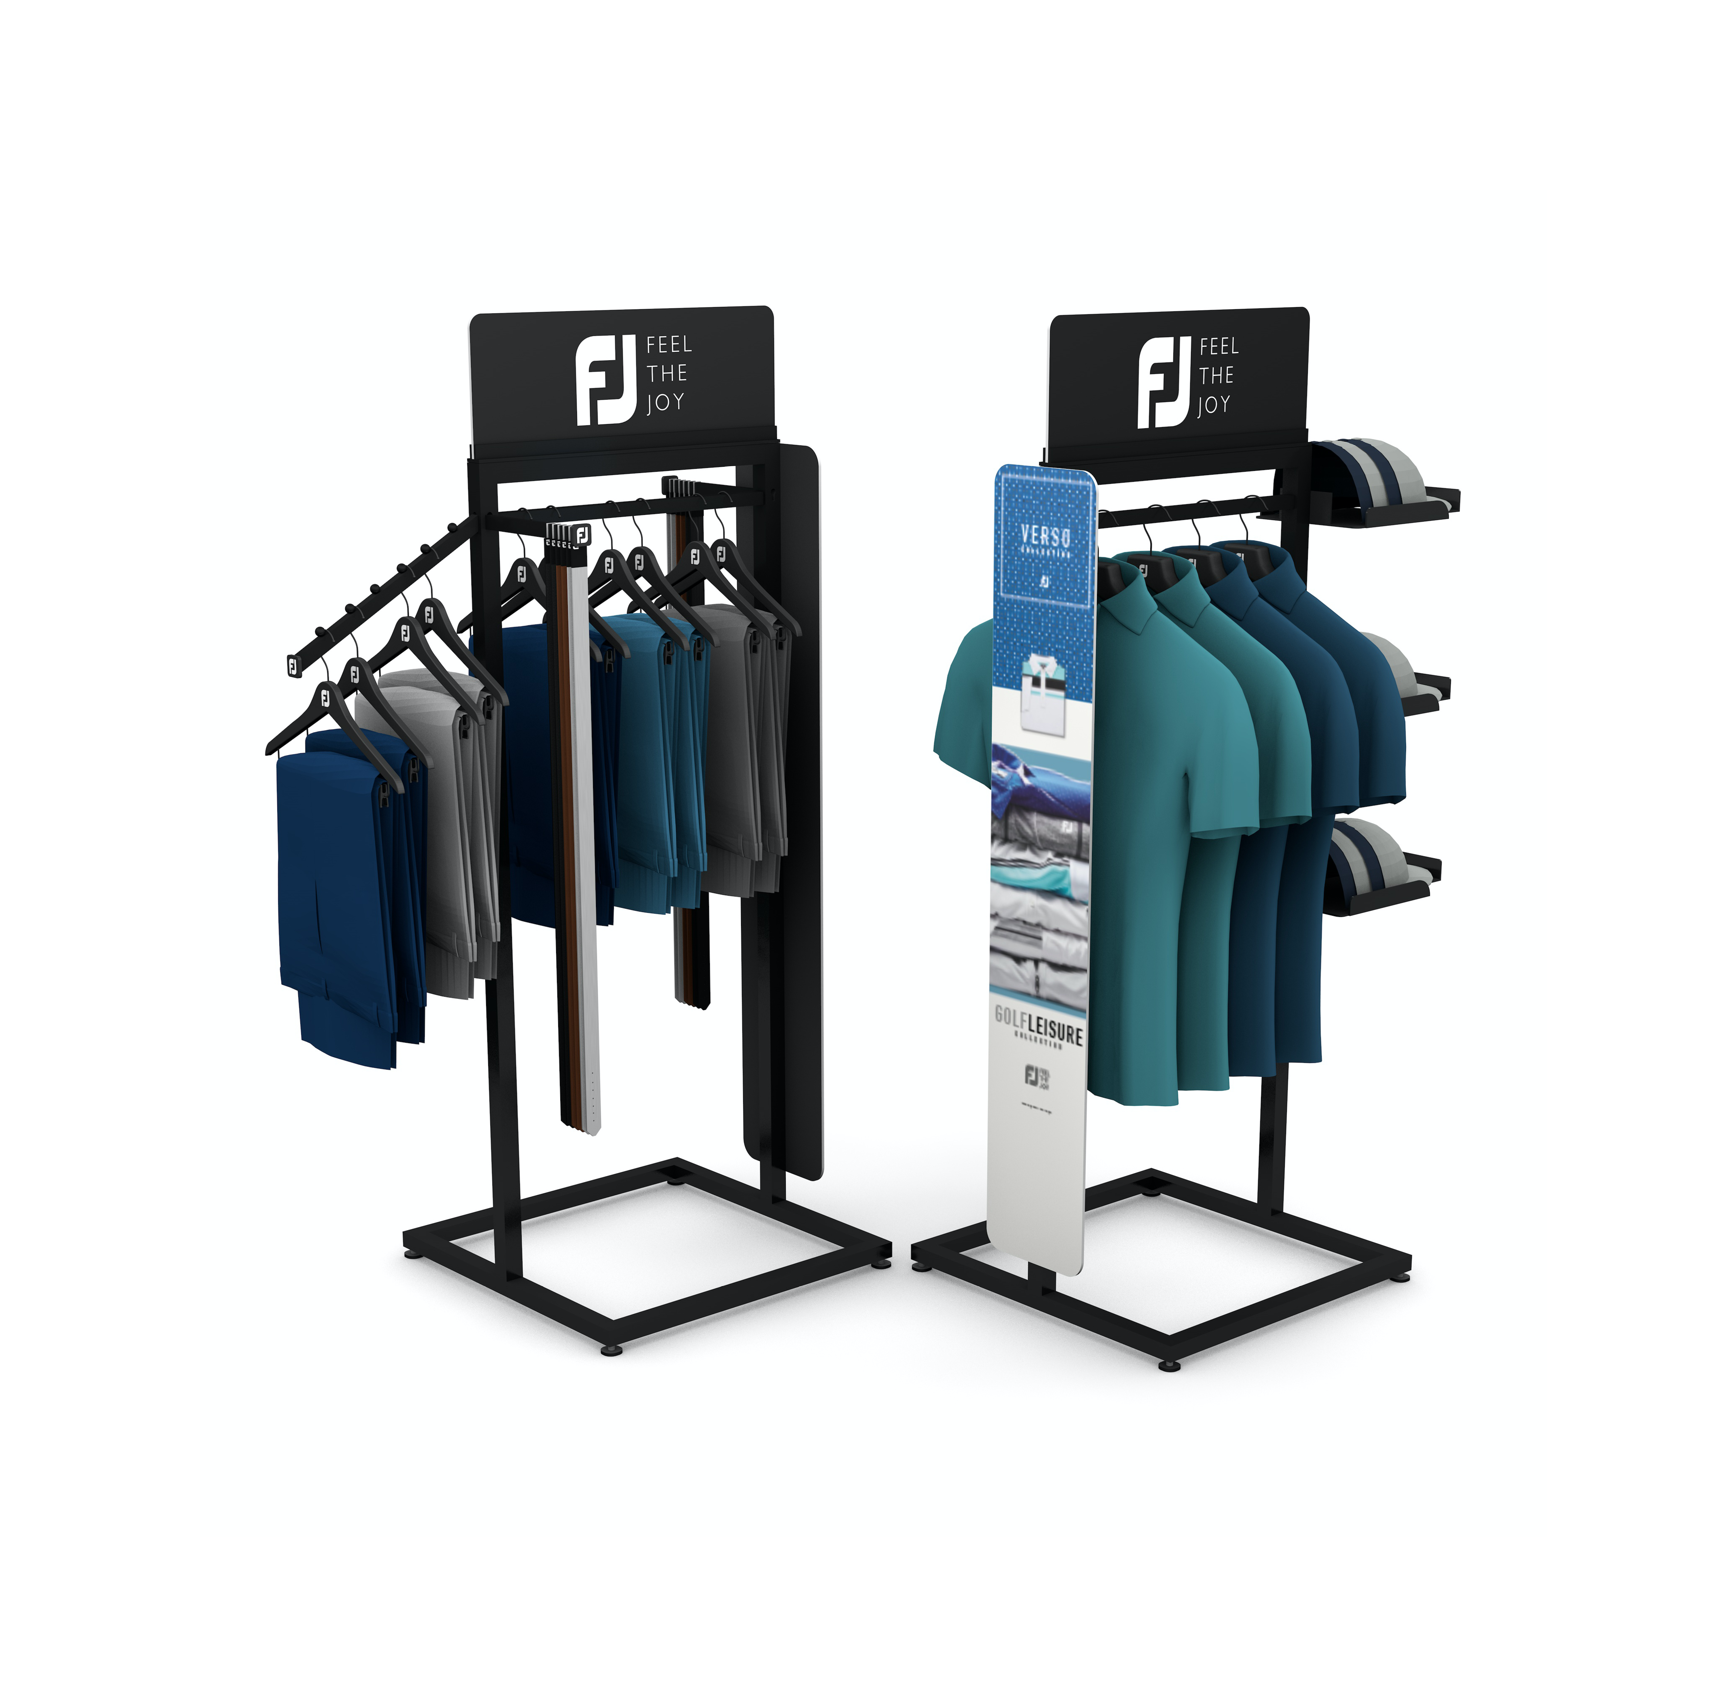 Point of sale stands